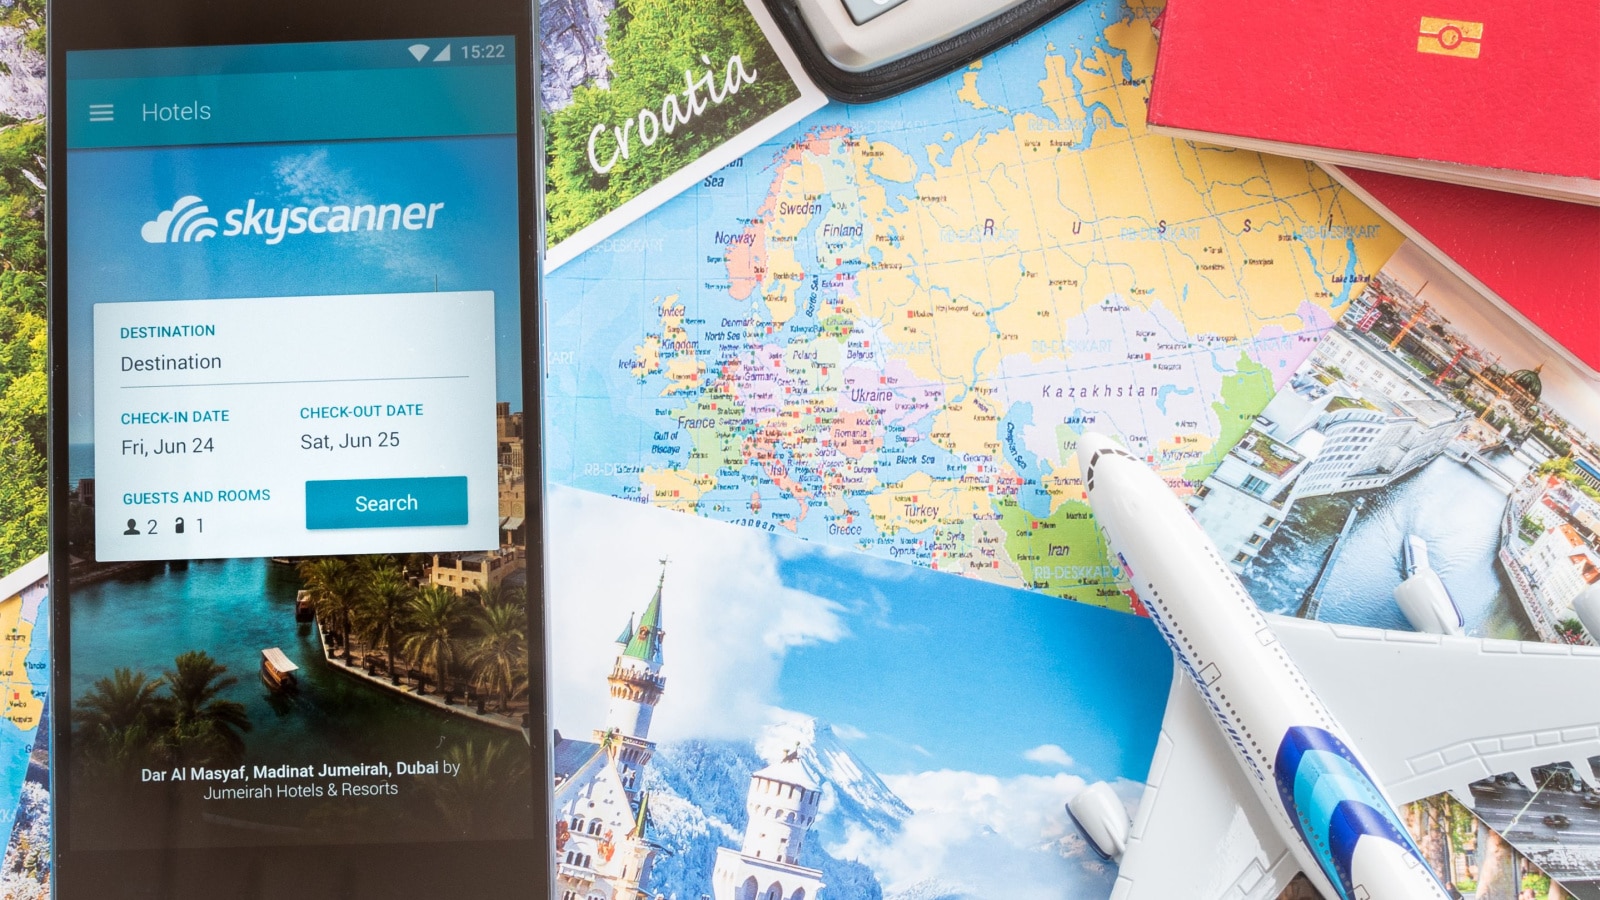 MANCHESTER, UNITED KINGDOM -27 JUNE 2016: Mobile apps make traveling so much easier. Search, compare and book cheap flights on the go with the award-winning Skyscanner Flights app!